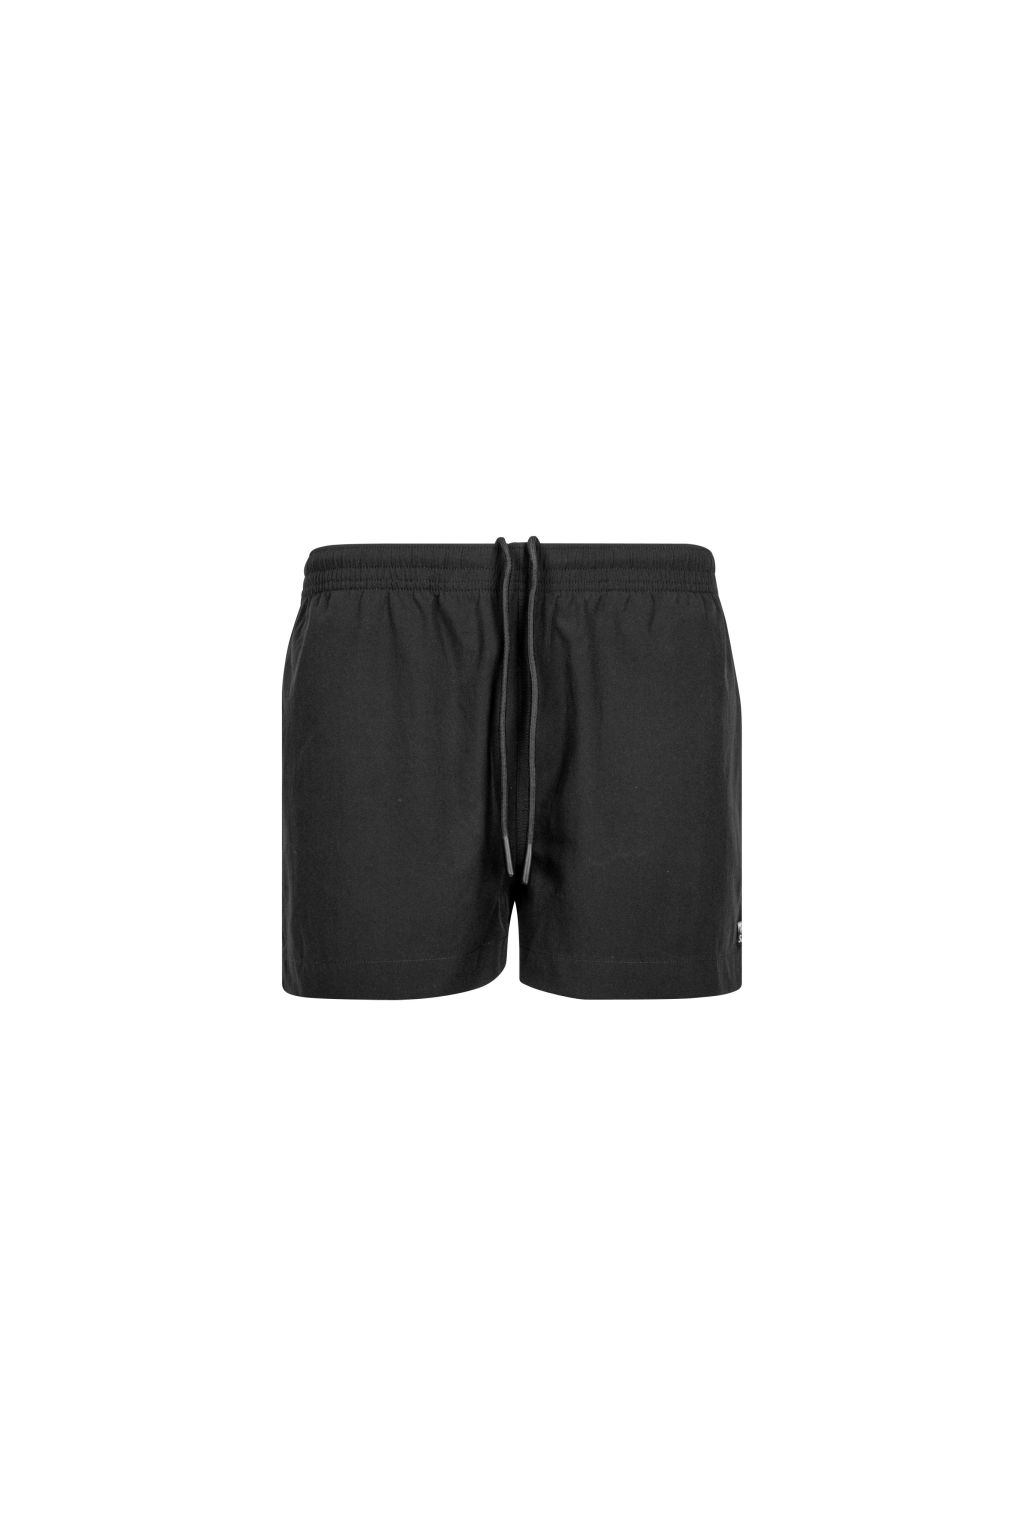 Spika GO Classic Mens Yard Shorts - Black - S - Mansfield Hunting & Fishing - Products to prepare for Corona Virus